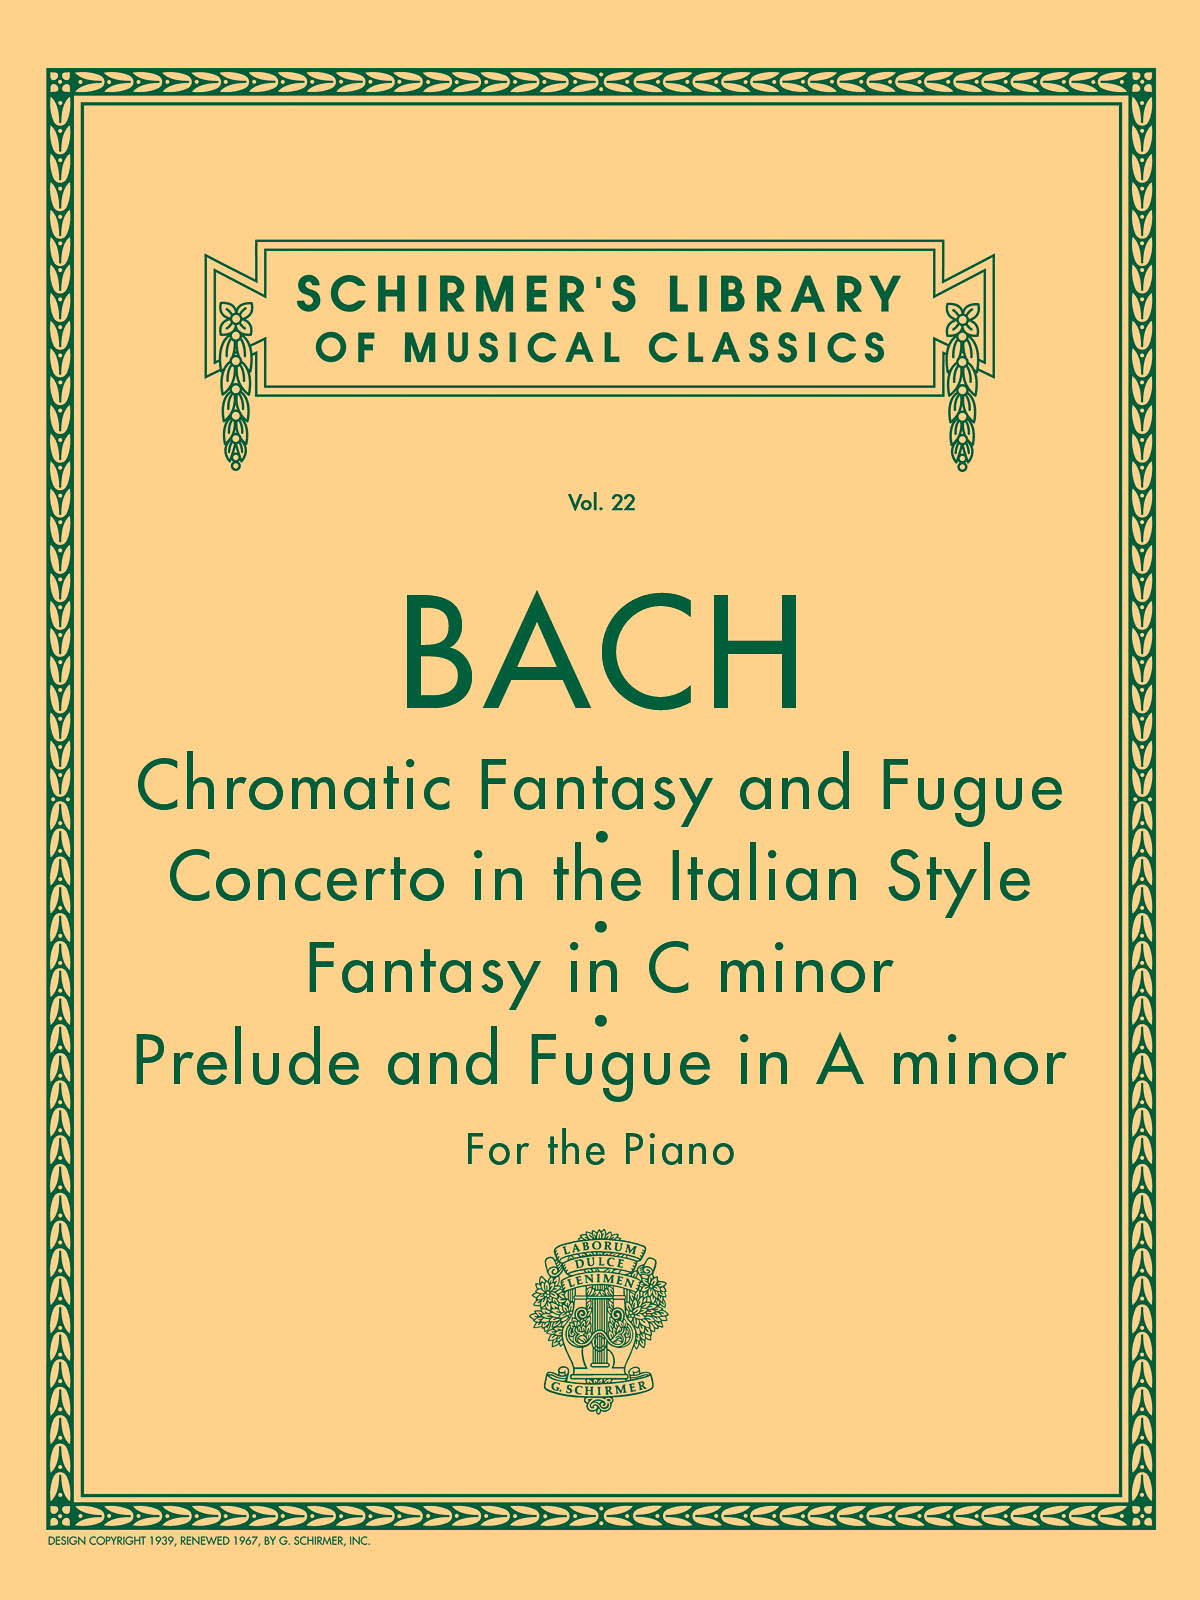 Bach: Chromatic Fantasy and Fugue, Concerto in It. Style